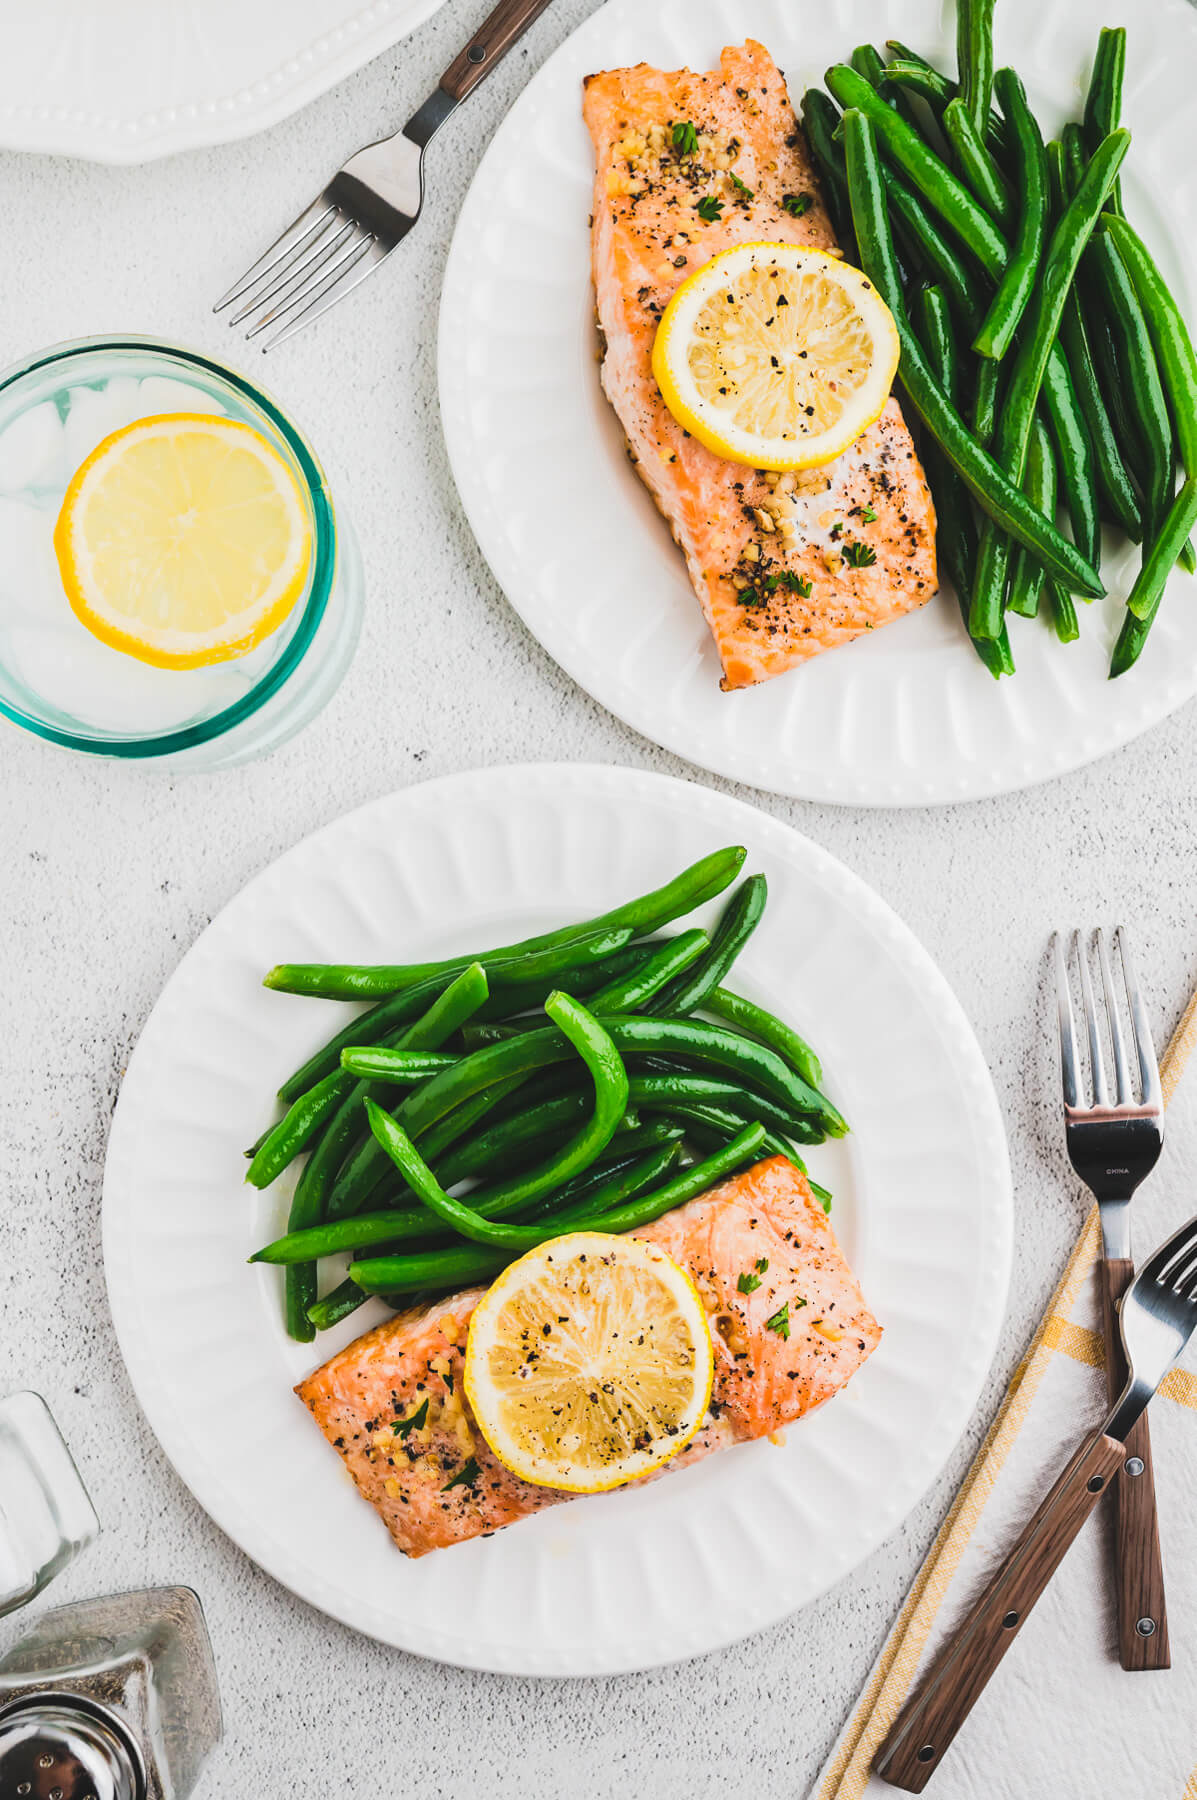 A table scene with two dinner plates of baked lemon pepper salmon with green beans surrounded by lemons, forks, and napkins.